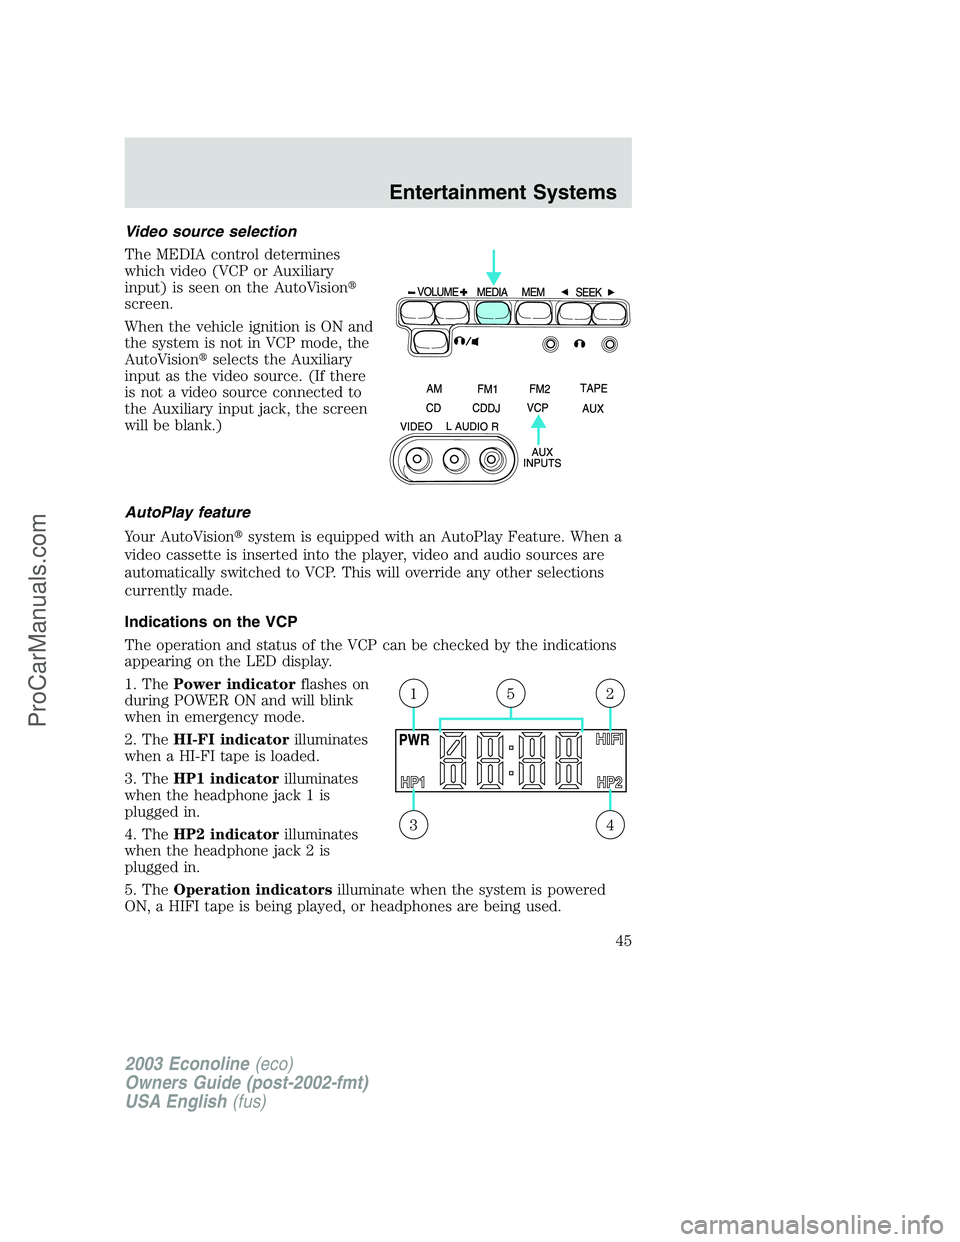 FORD E-450 2003 Service Manual Video source selection
The MEDIA control determines
which video (VCP or Auxiliary
input) is seen on the AutoVision
screen.
When the vehicle ignition is ON and
the system is not in VCP mode, the
AutoV